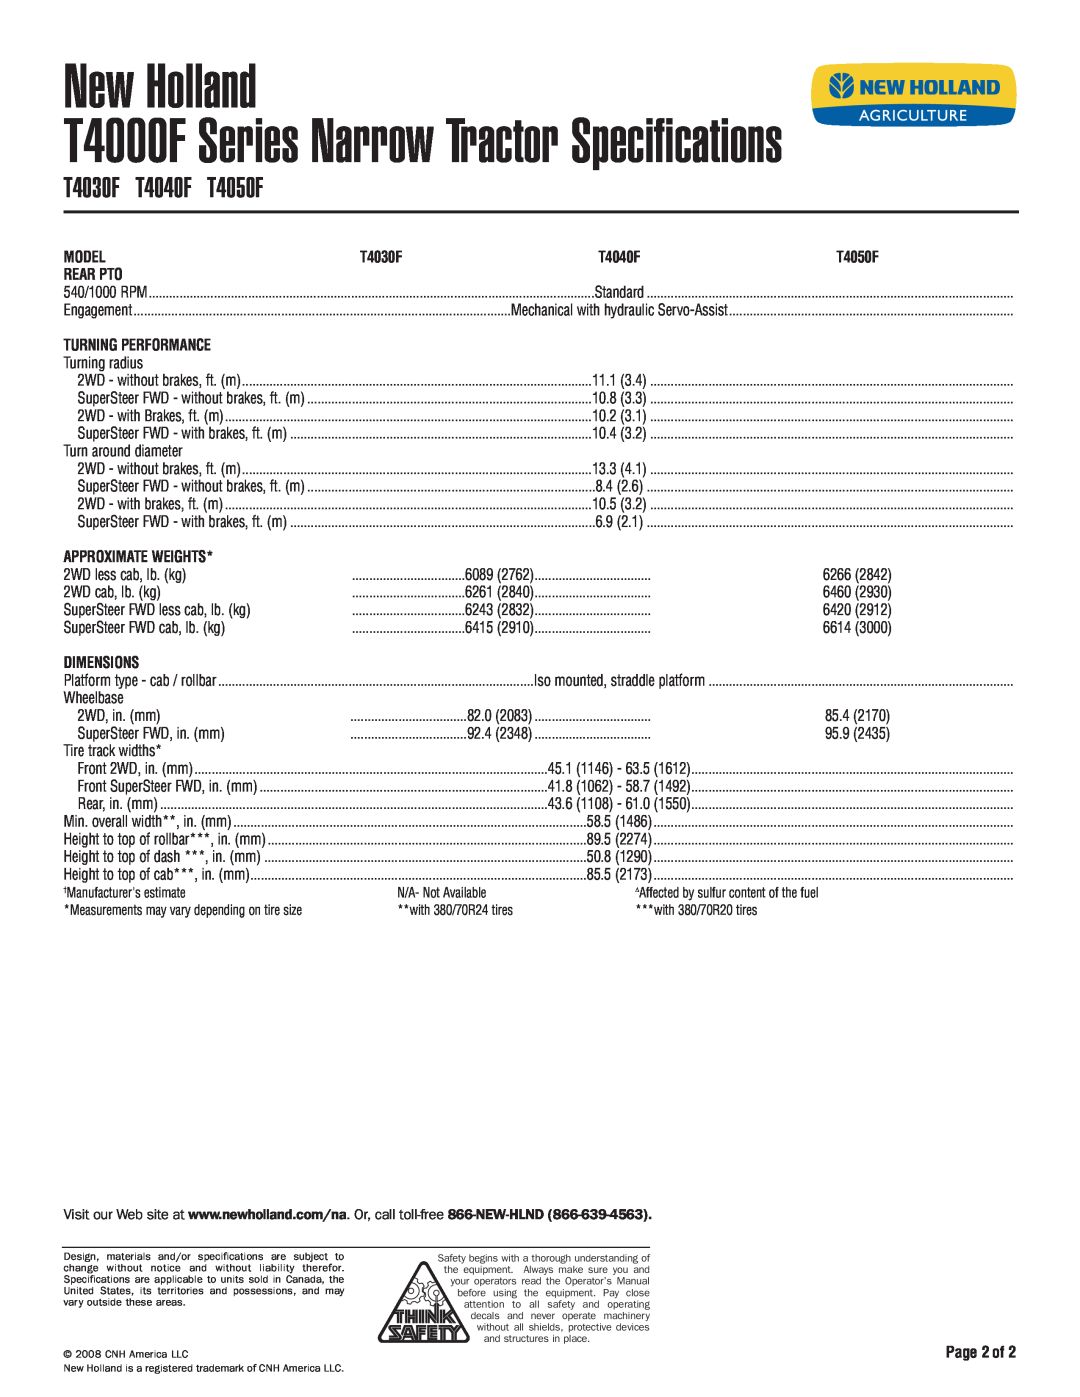 New Holland T4040F T4030F, Turning Performance, Approximate Weights, Dimensions, Page 2of, New Holland, T4050F, Model 